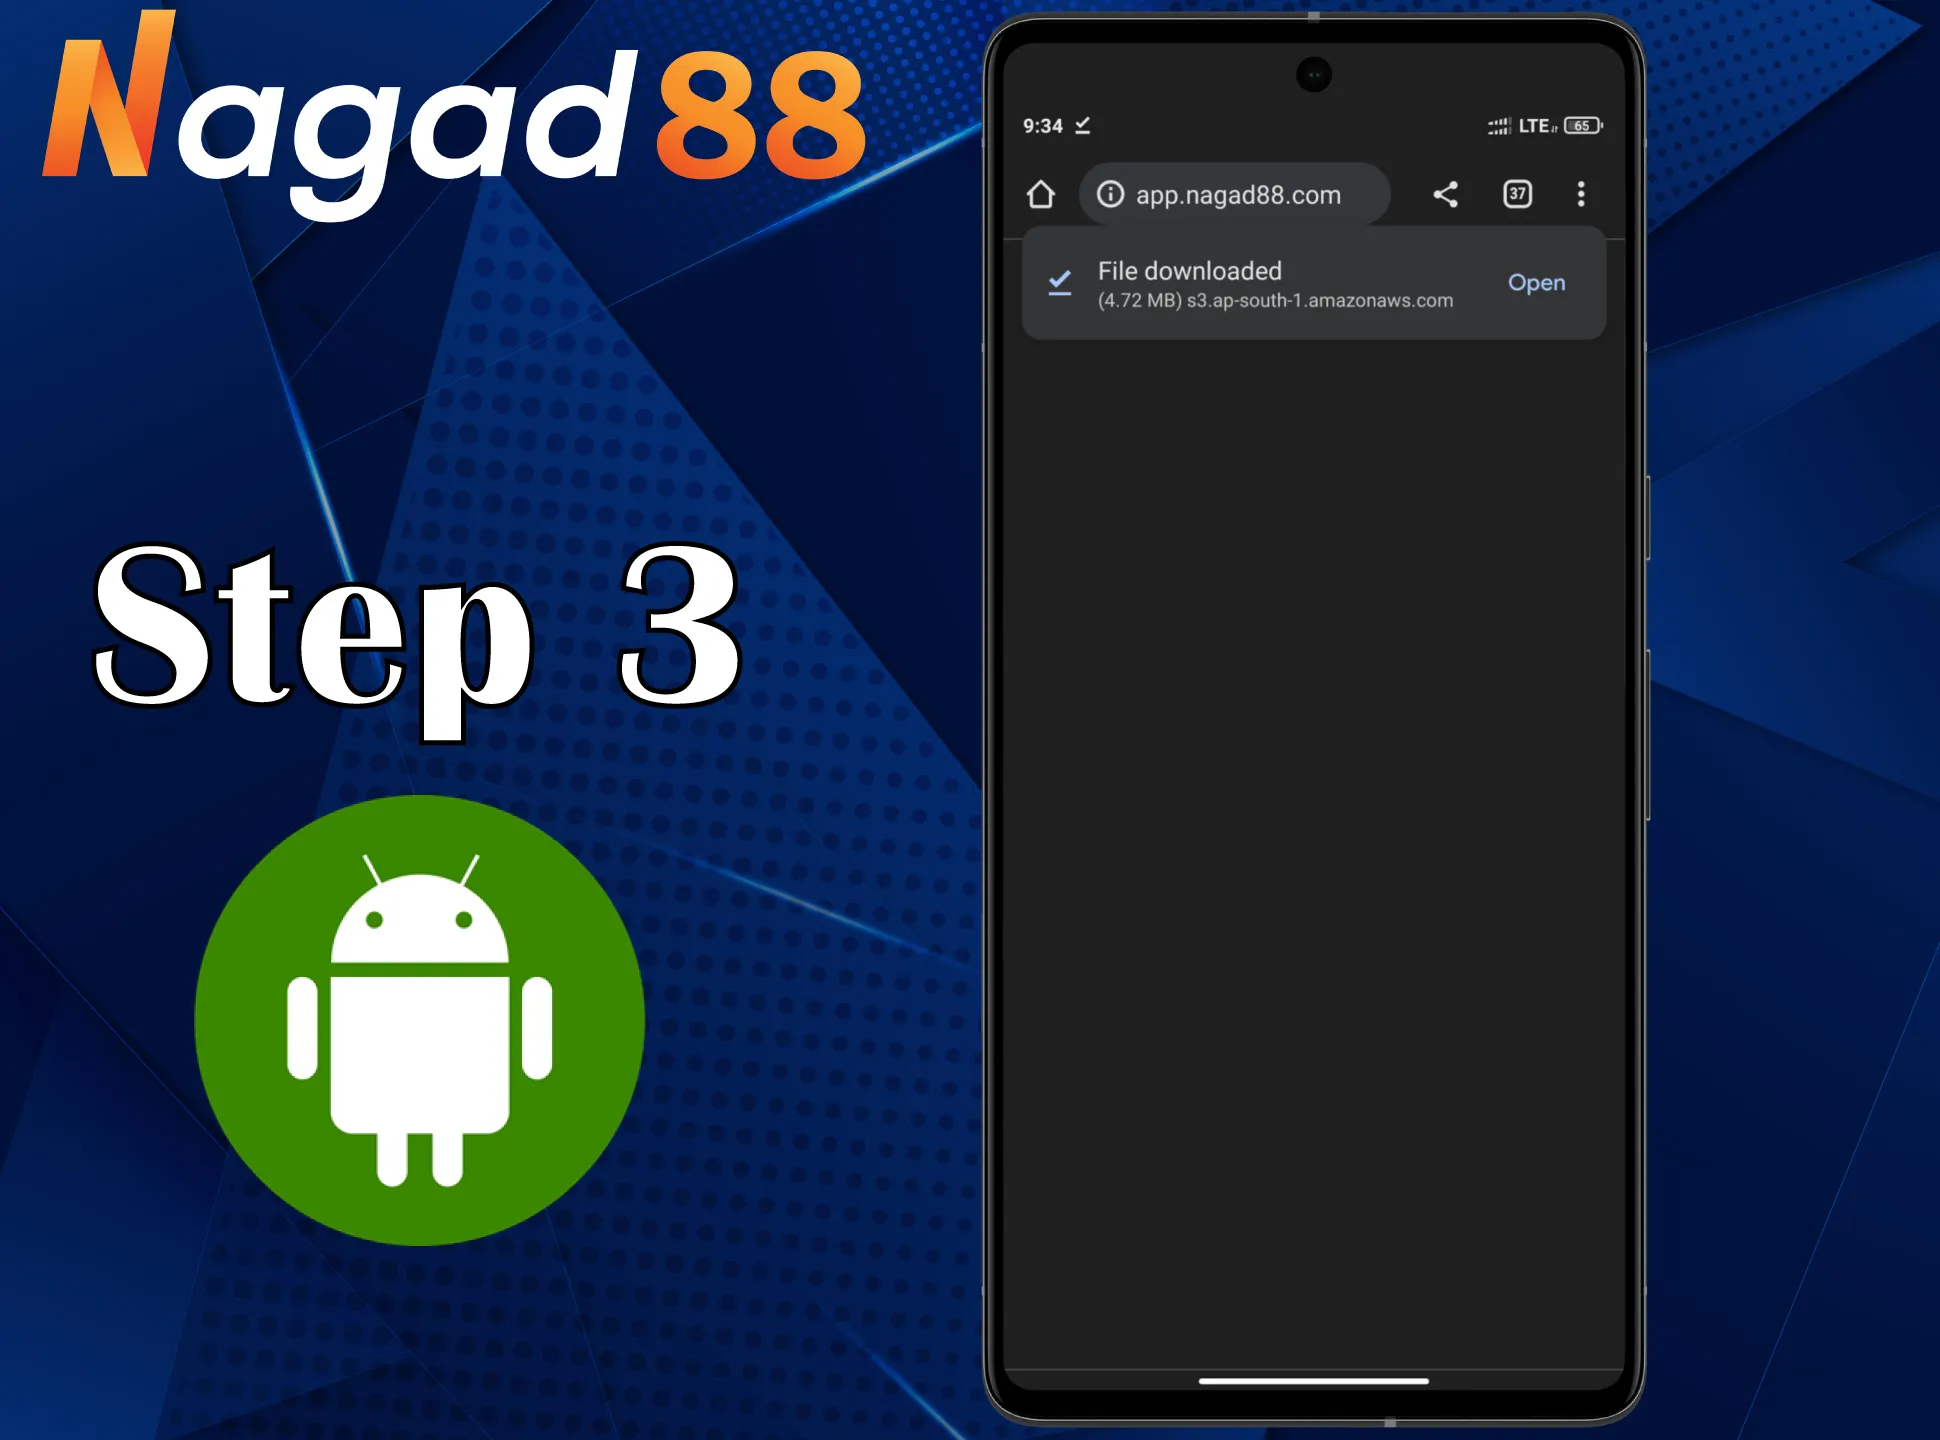 Finish the process of downloading the Nagad88 app.